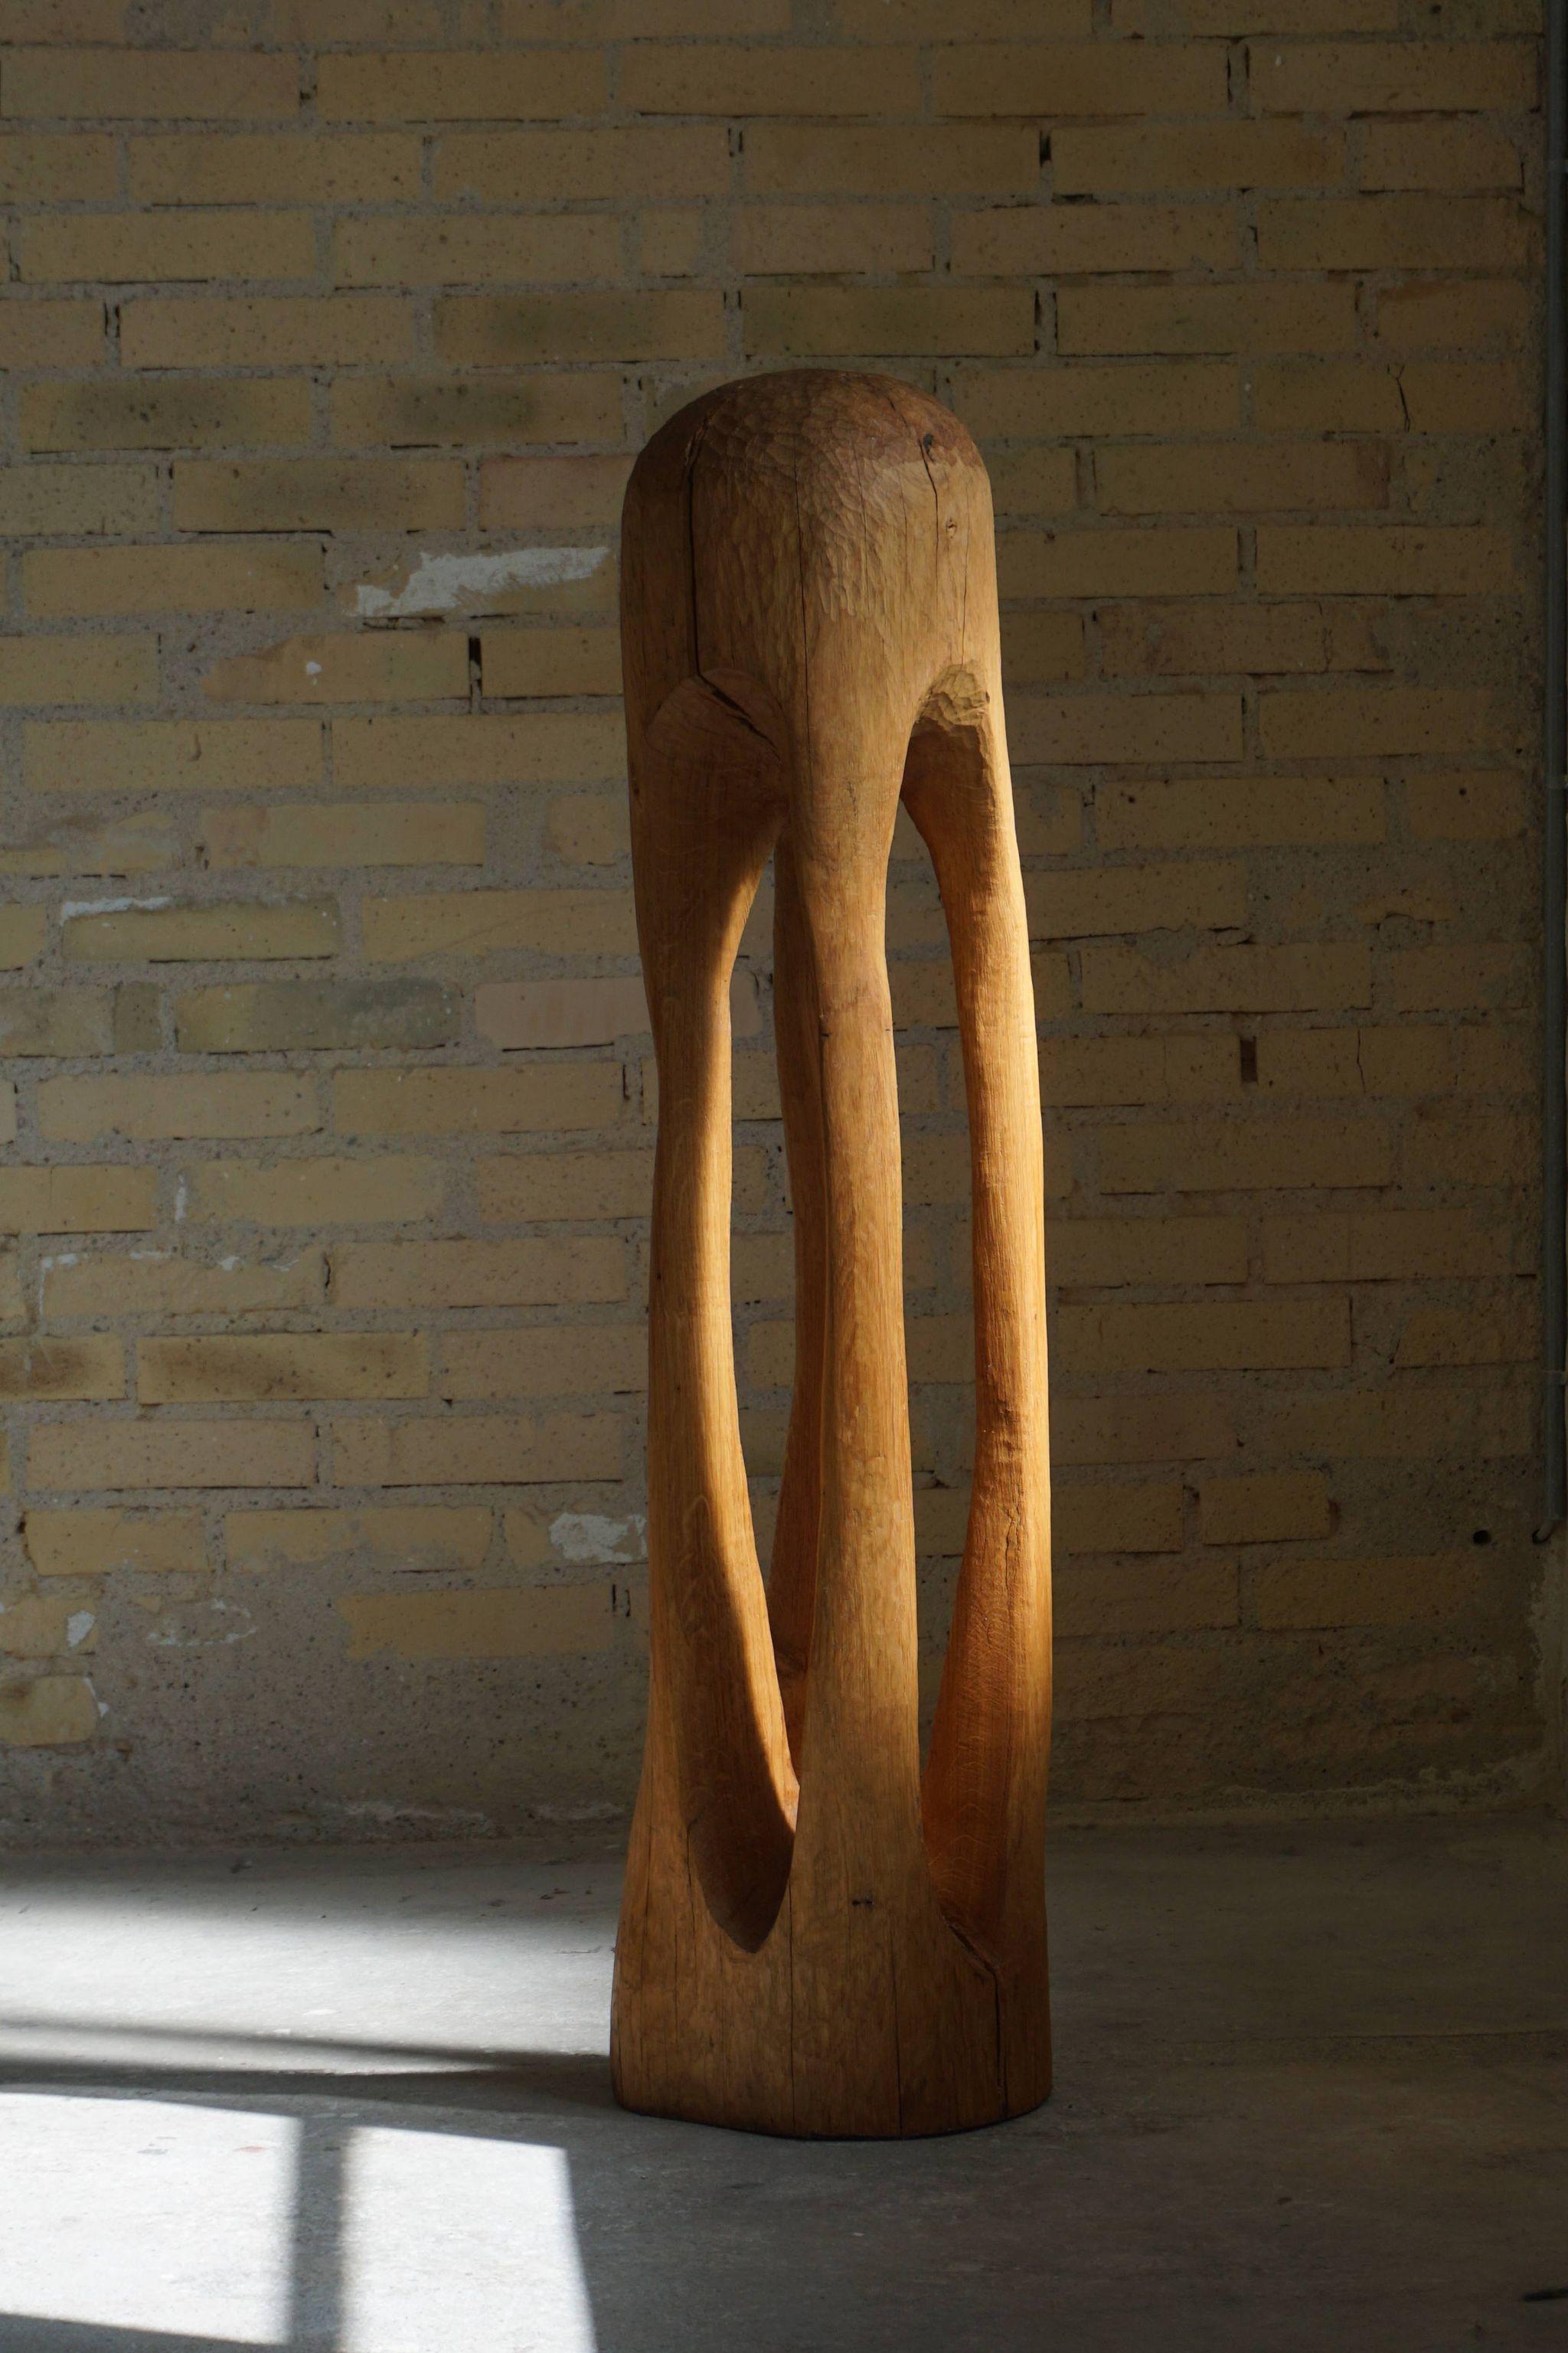 Large wooden sculpture in oak, made by Danish artist Ole Wettergren in 1980s.
Ole is famous for his wooden sculptures and he has presented in international magazines like ARK Journal.